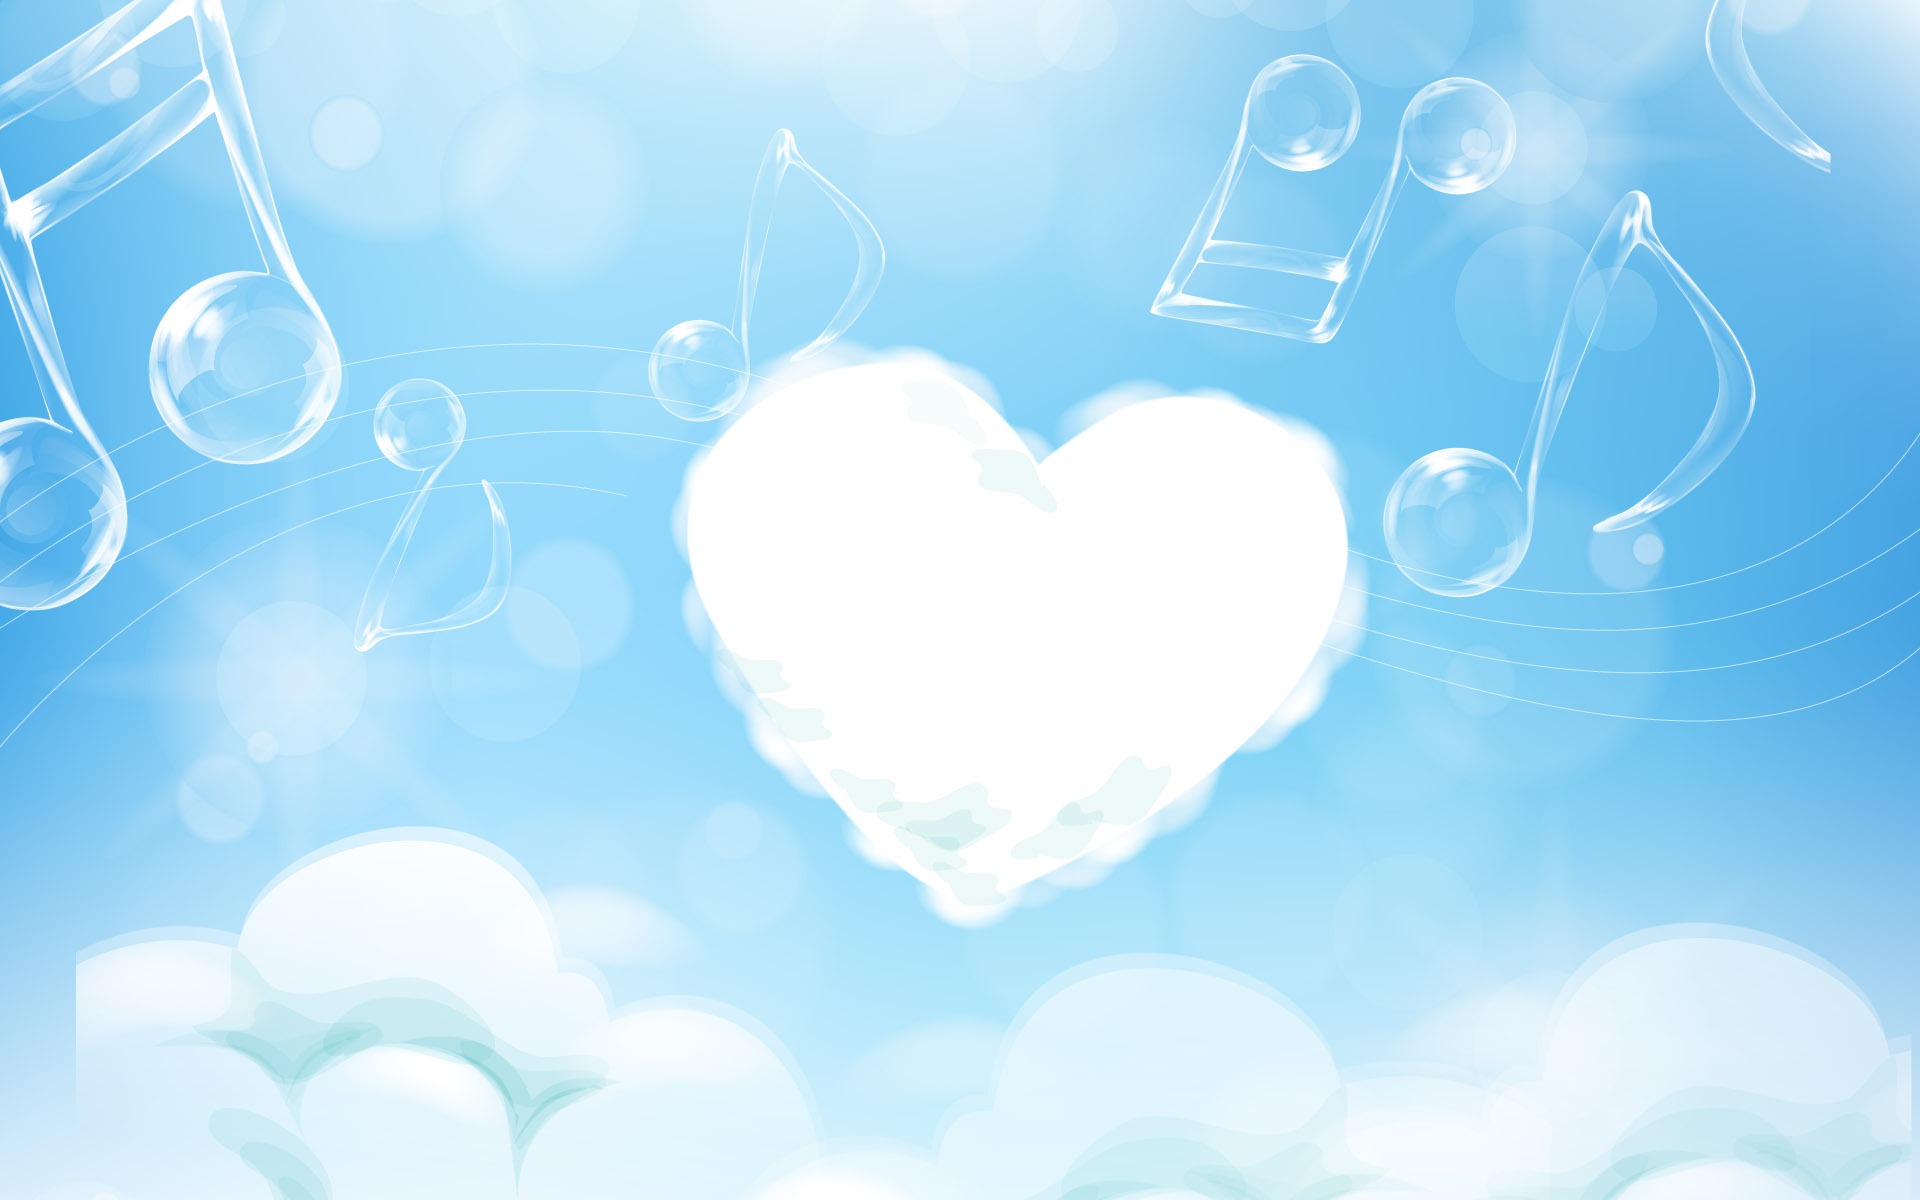 Valentine's Day Love Theme Wallpapers (3) #2 - 1920x1200